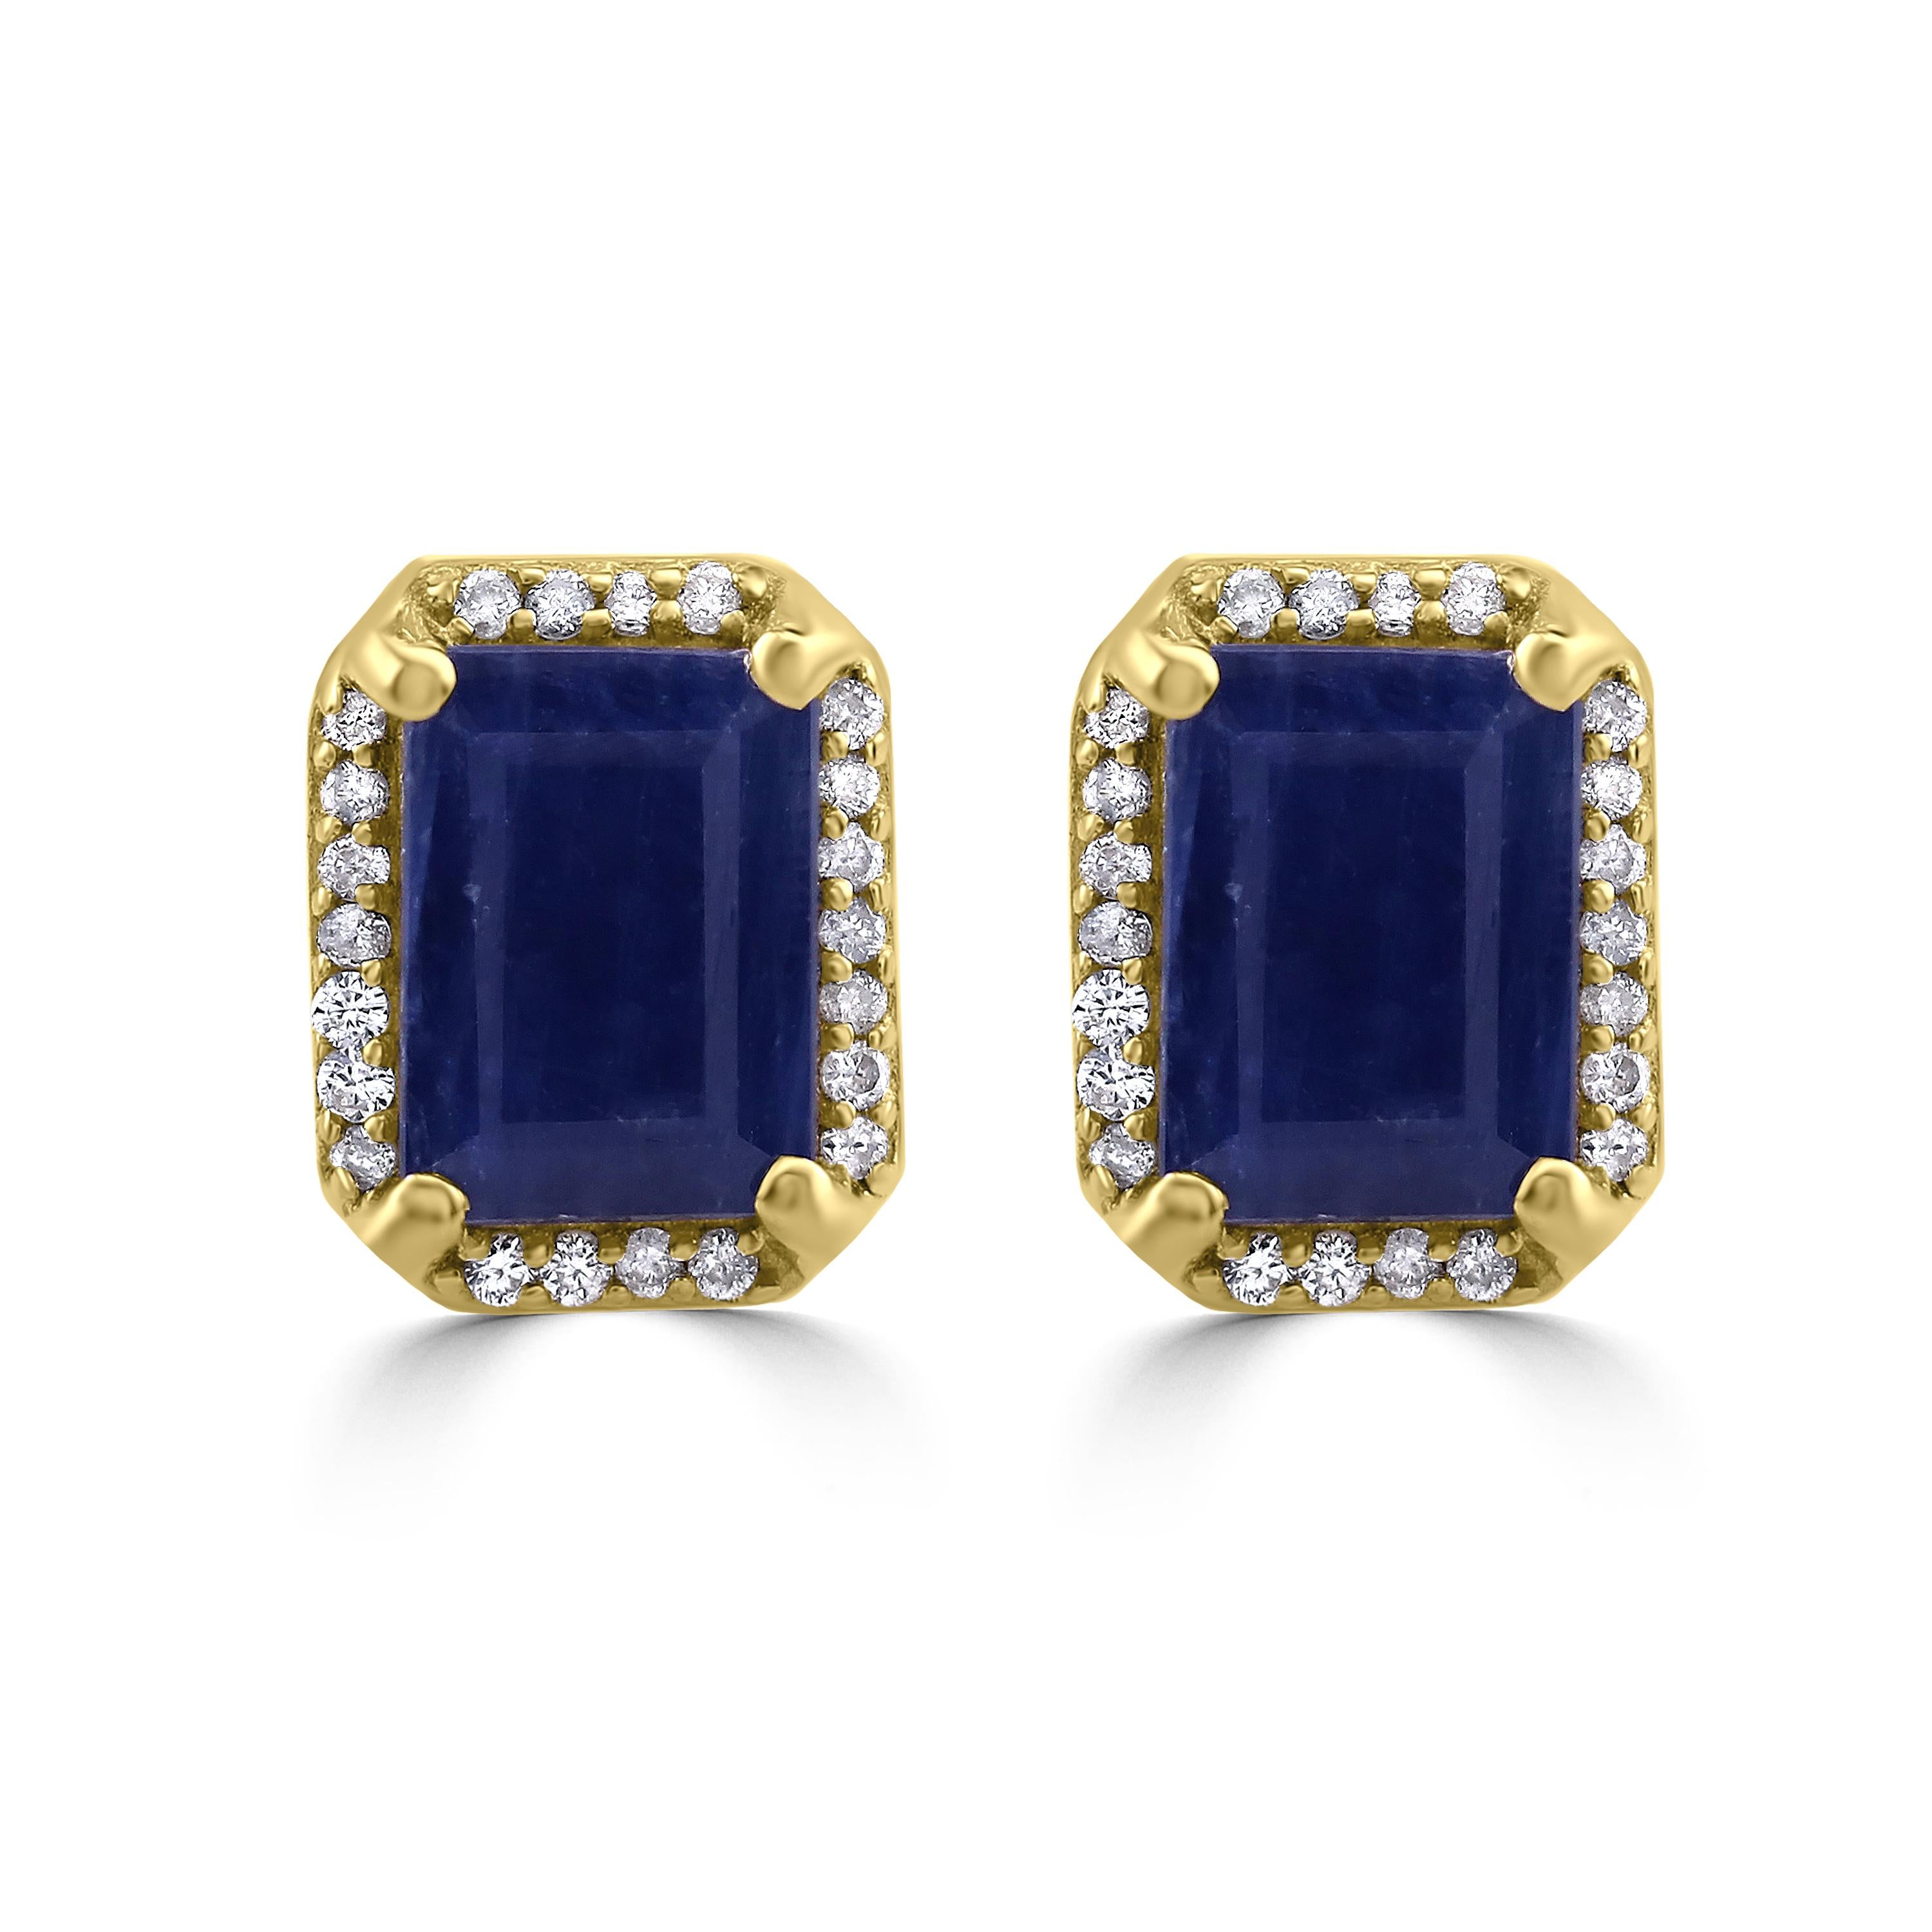 Octagon Cut Gemistry 2.9 Carat Octagon Blue Sapphire Stud Earrings with Diamond in 14K Gold For Sale